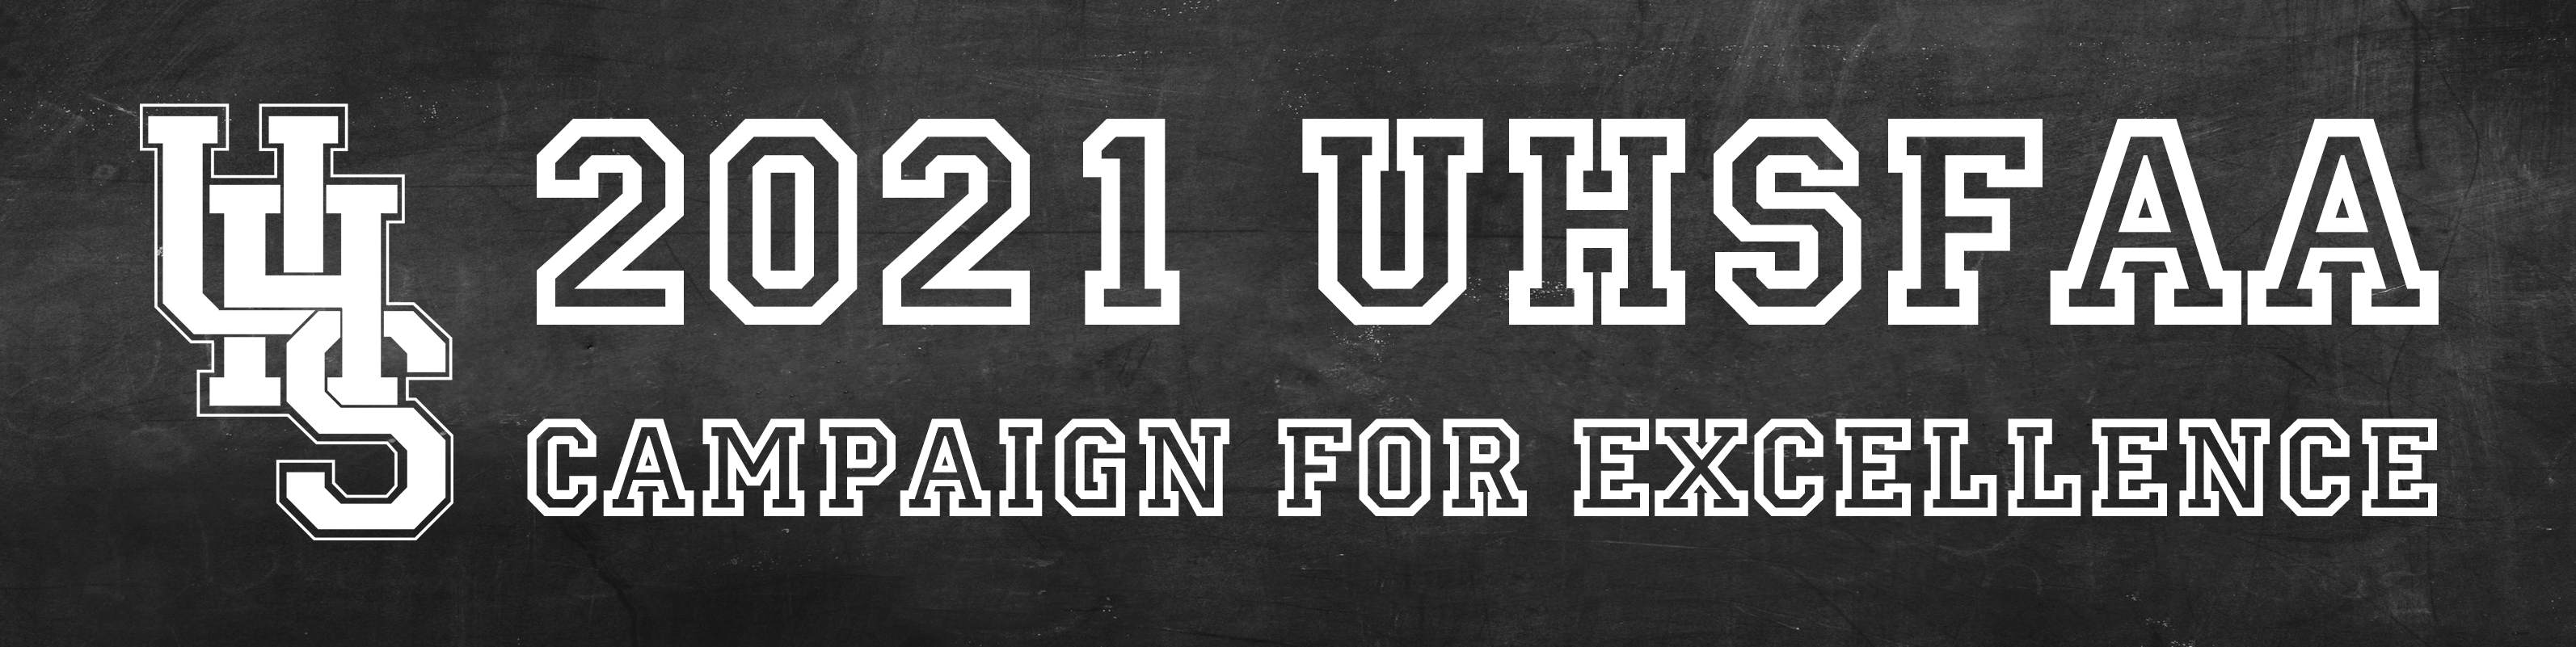 2021 UHSFAA Campaign Banner